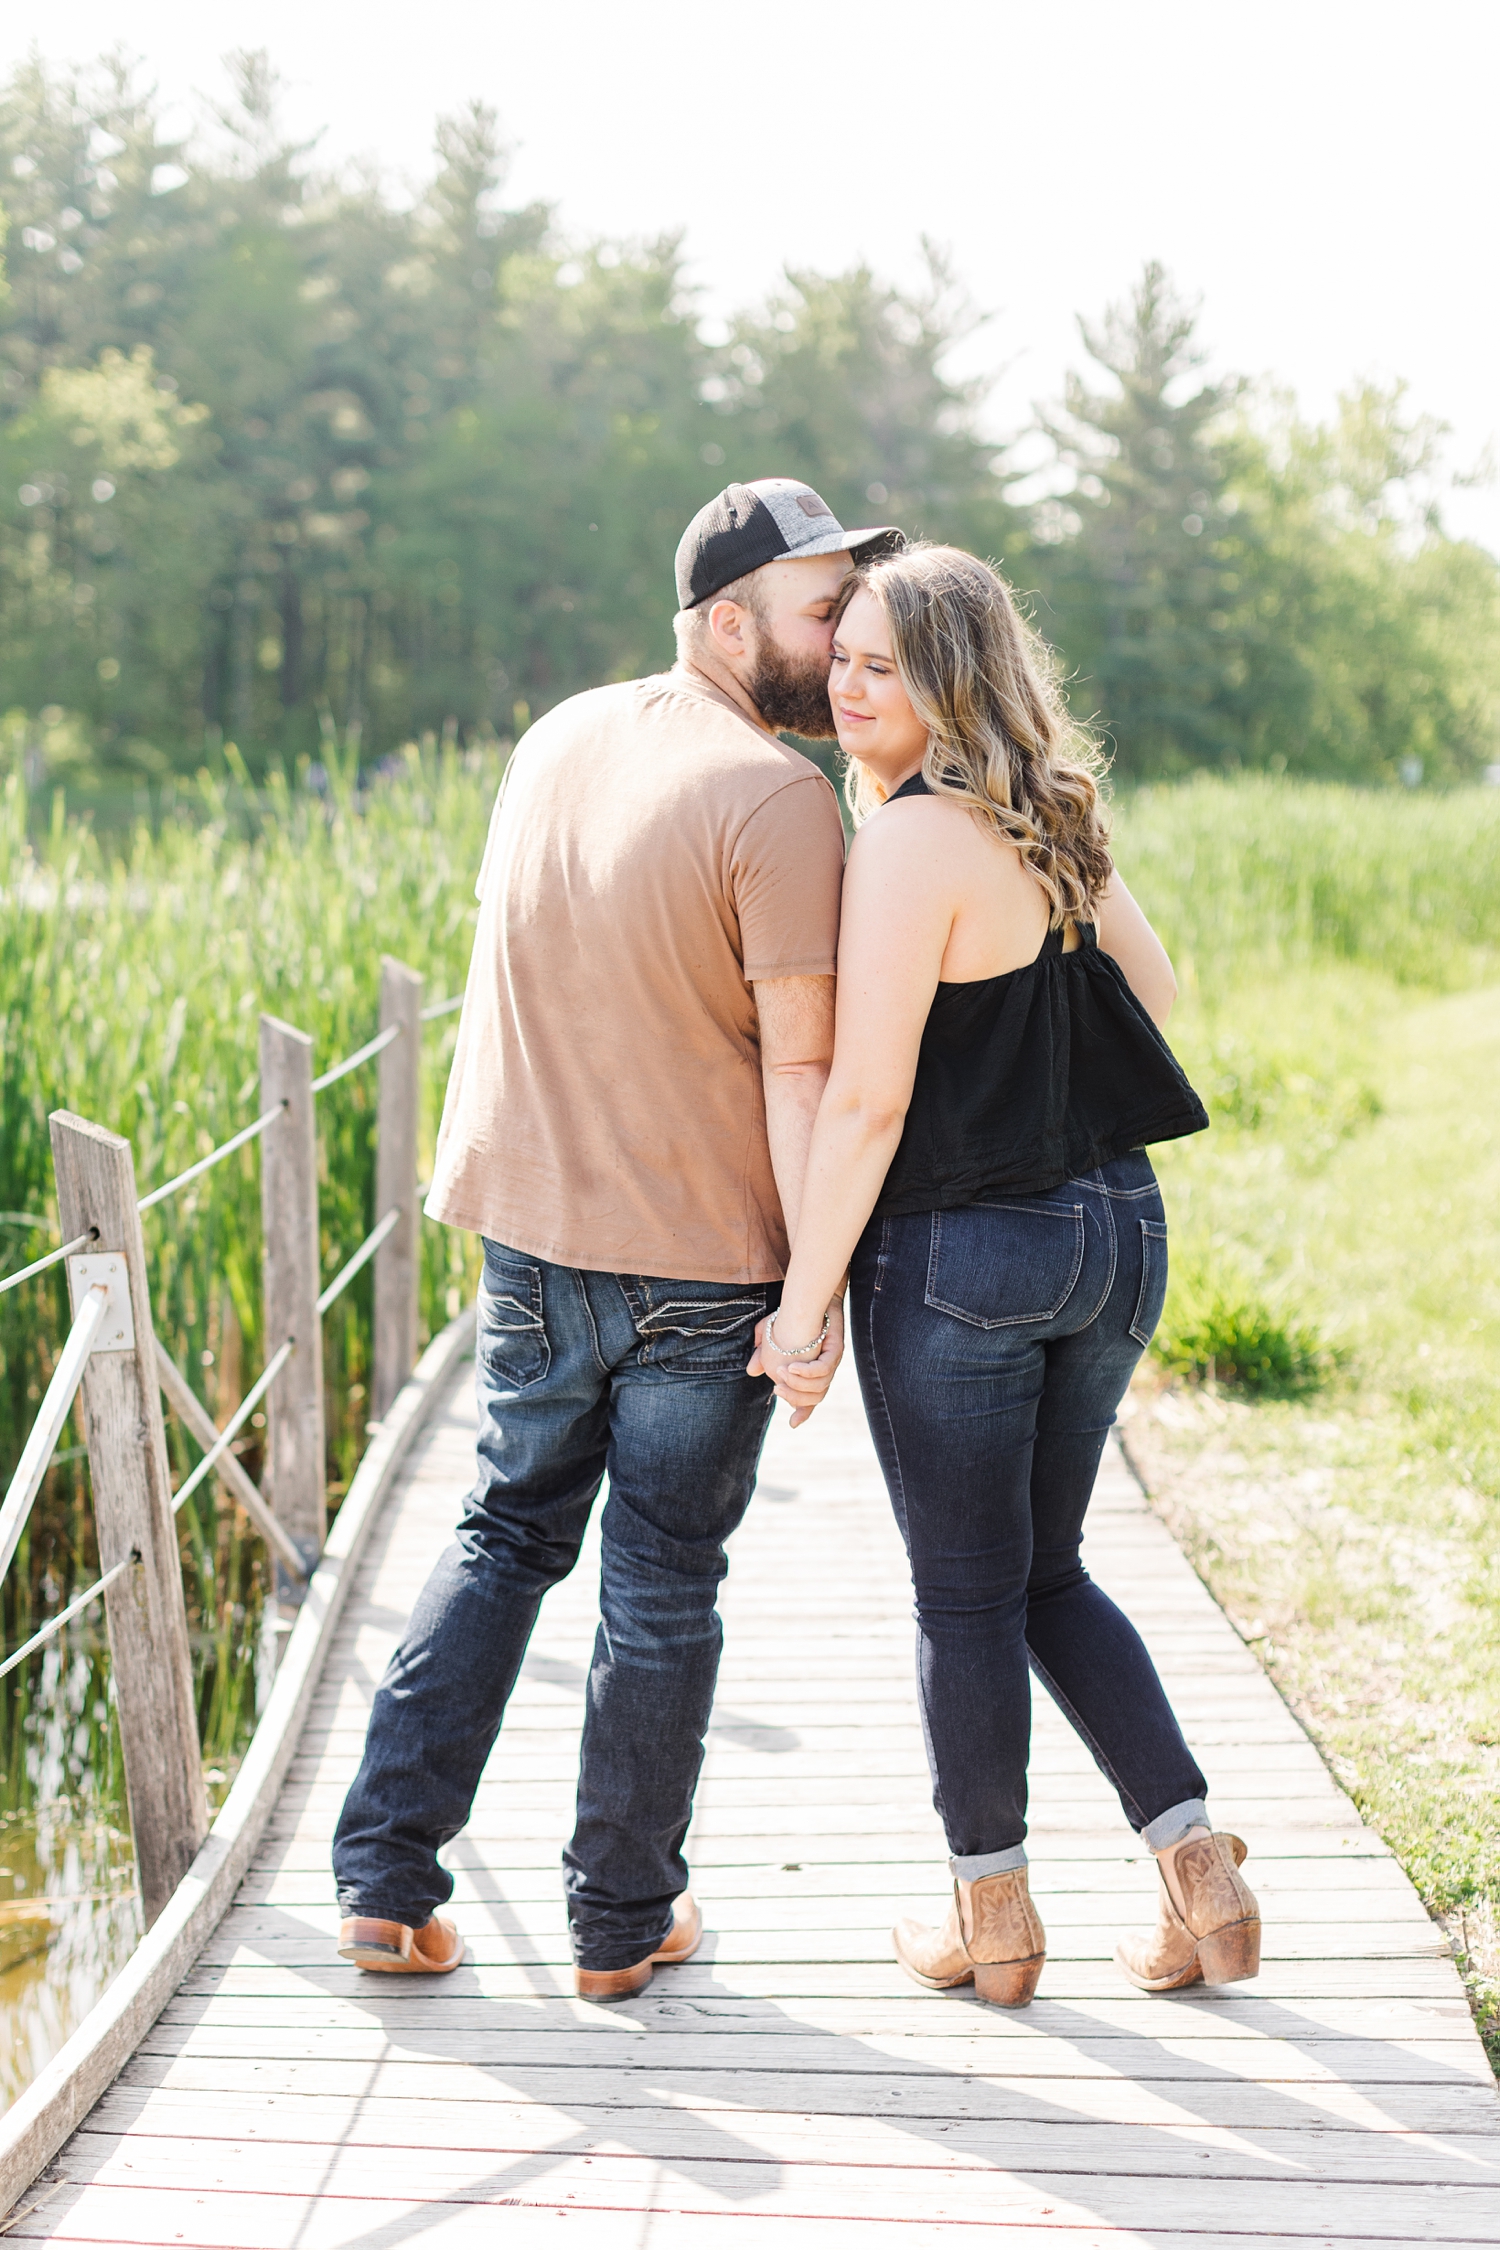 Matt whispers in to Megan's ear as they walk along a wooden deck path at Jester Park in Granger Iowa | CB Studio